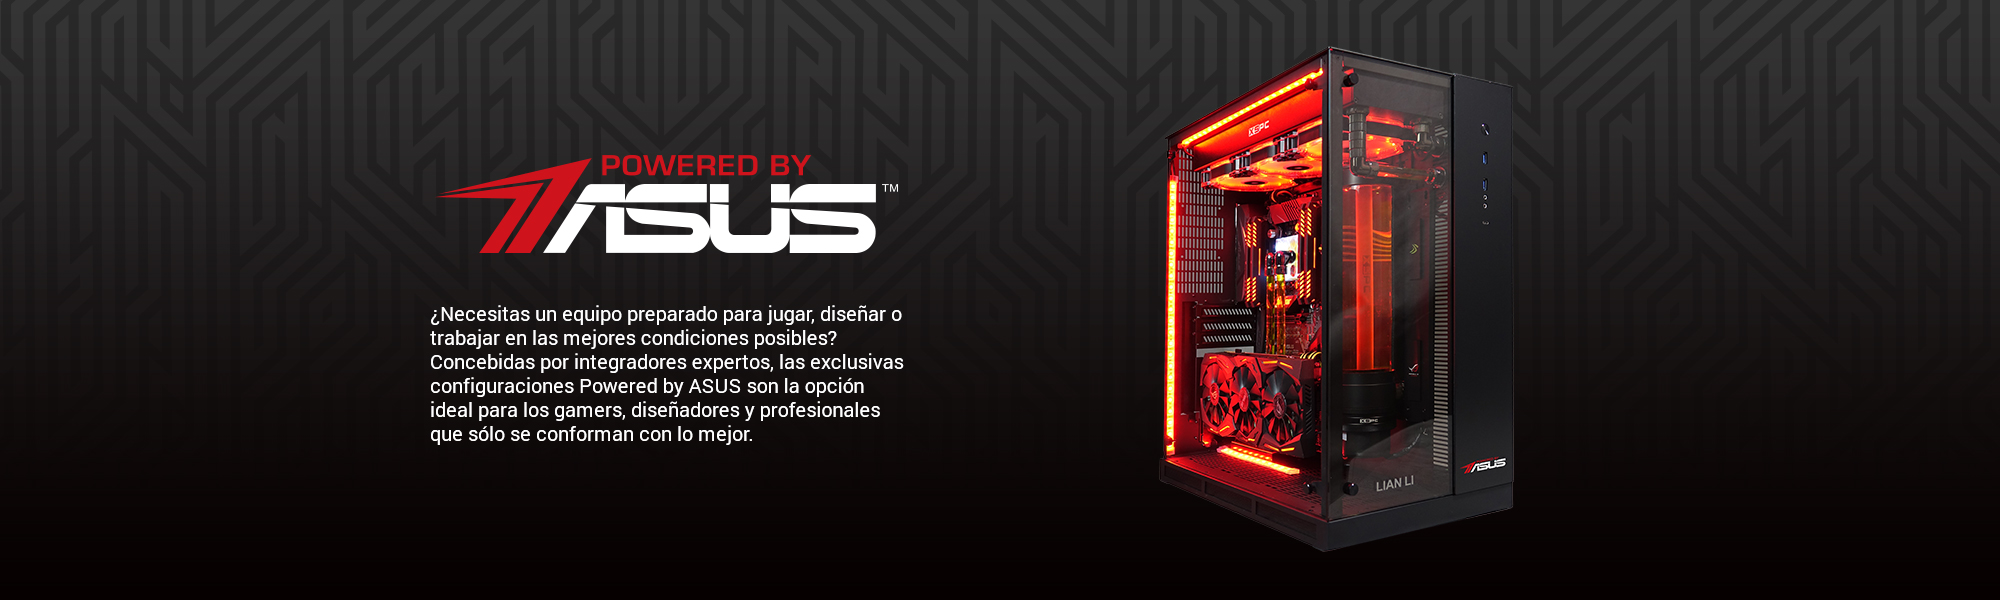 Equipos Powered by Asus